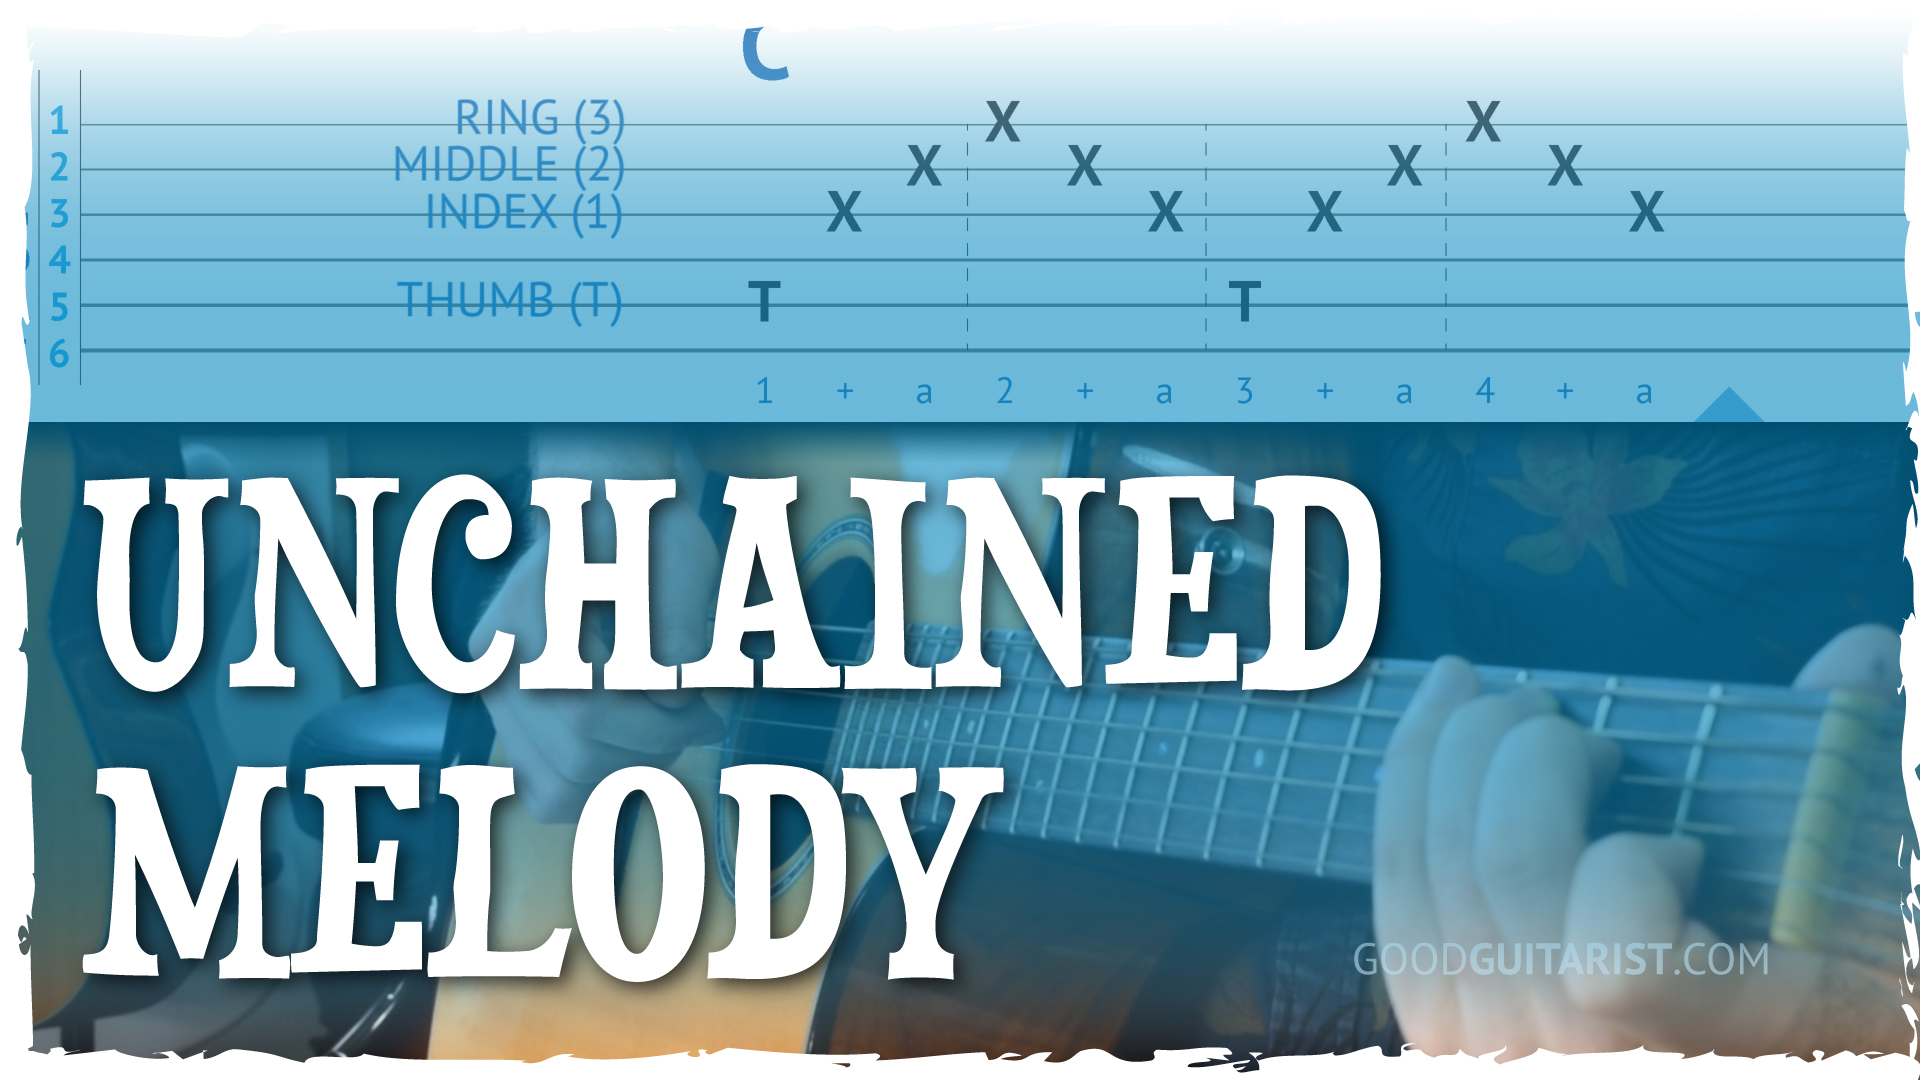 Unchained Melody Guitar Tab by The Righteous Brothers (Guitar Tab – 154790)